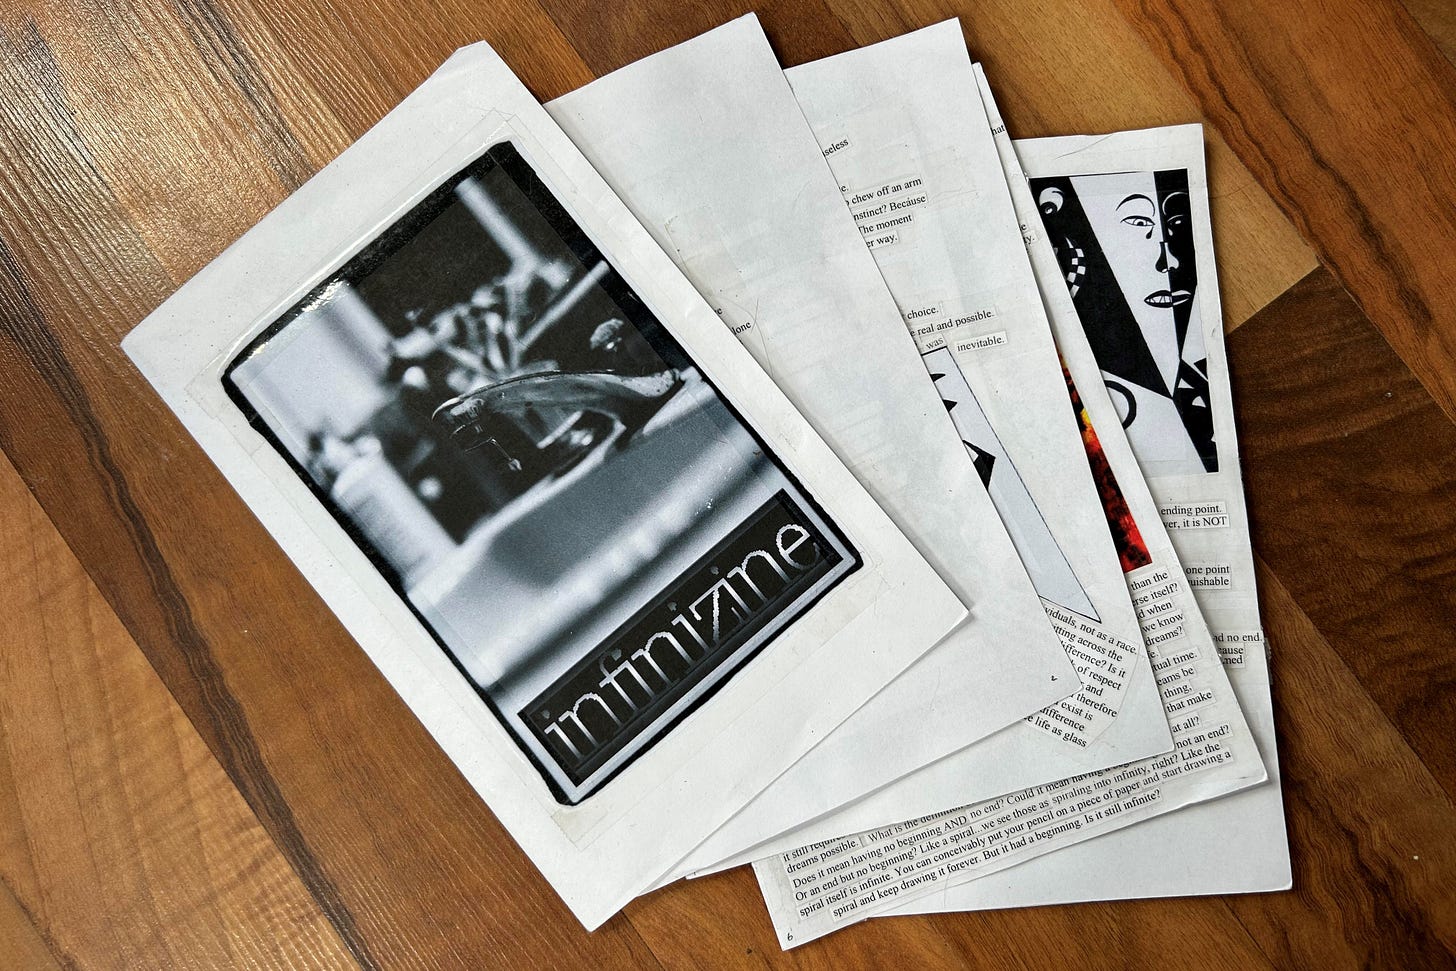 A half-page booklet has been arranged with its leaves fanned out like a hand of playing cards. Peeking out from the edges of each page can be seen type-written cut-out text that has been arranged in a collage, with some high-contrast but unidentifiable imagery. The cover of the booklet features the word "infinizine" in lower-case faux-metallic text below a dramatic black and white photo of a dripping faucet. The cover photo has been attached to the booklet with scotch tape.